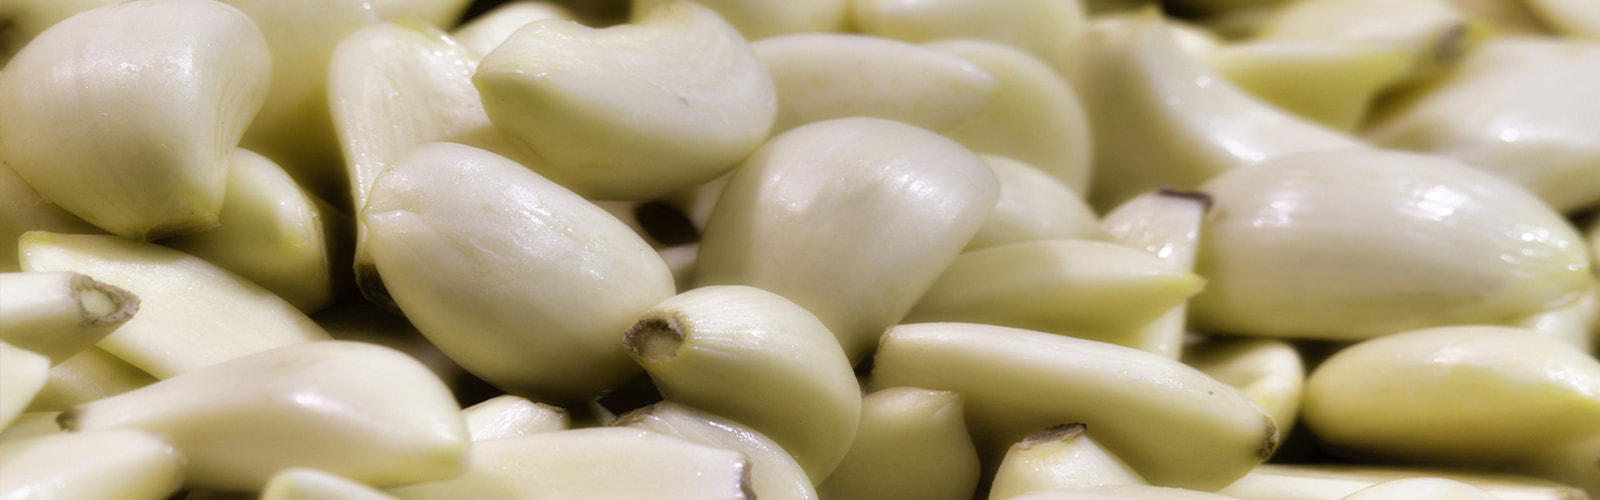 peeled Garlic Exporters from Spain